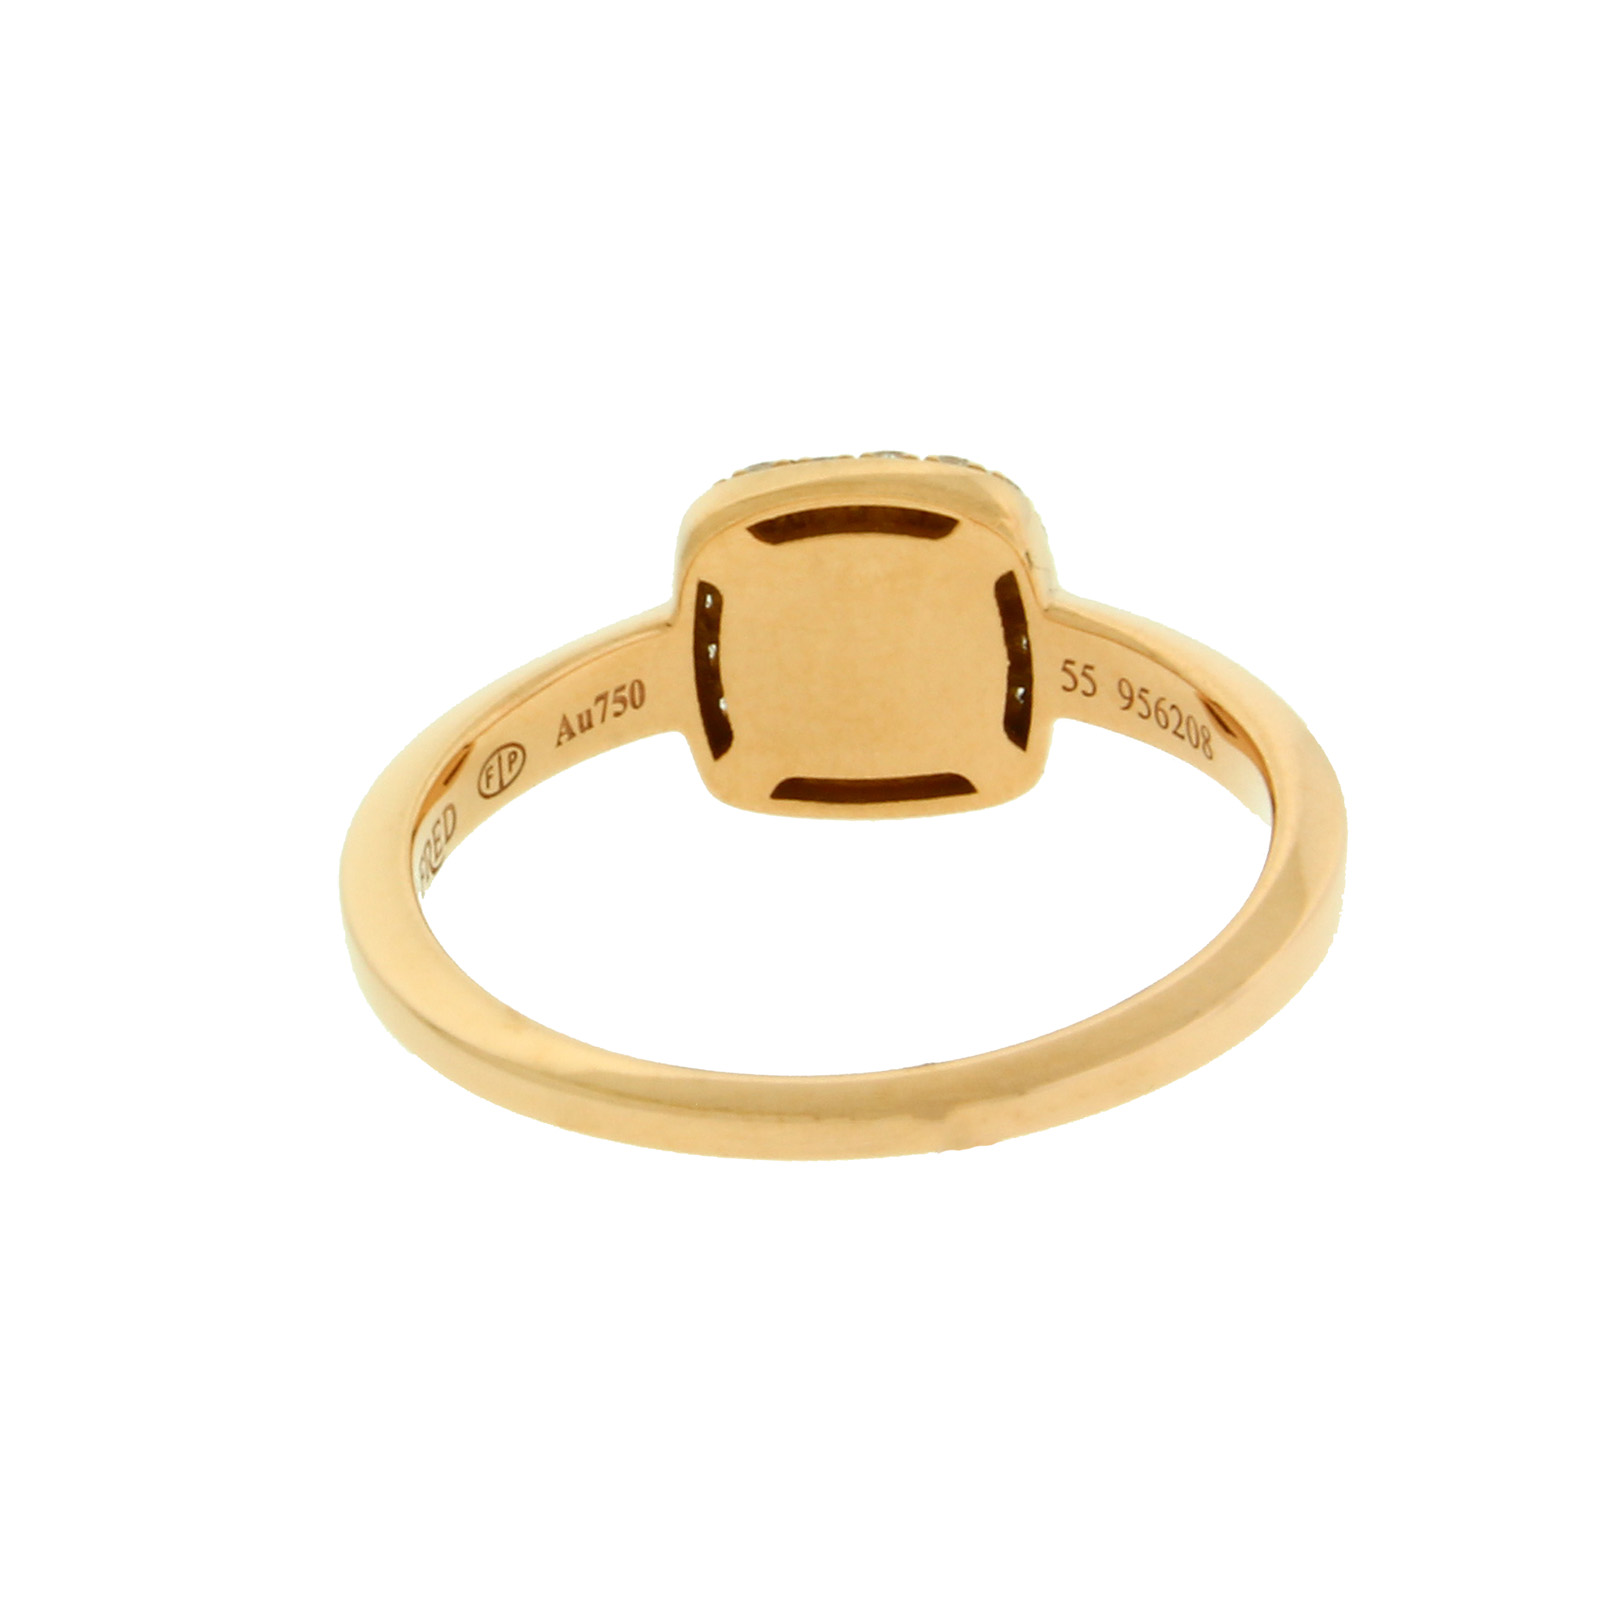 French 18k Gold Ring by Fred, Paris